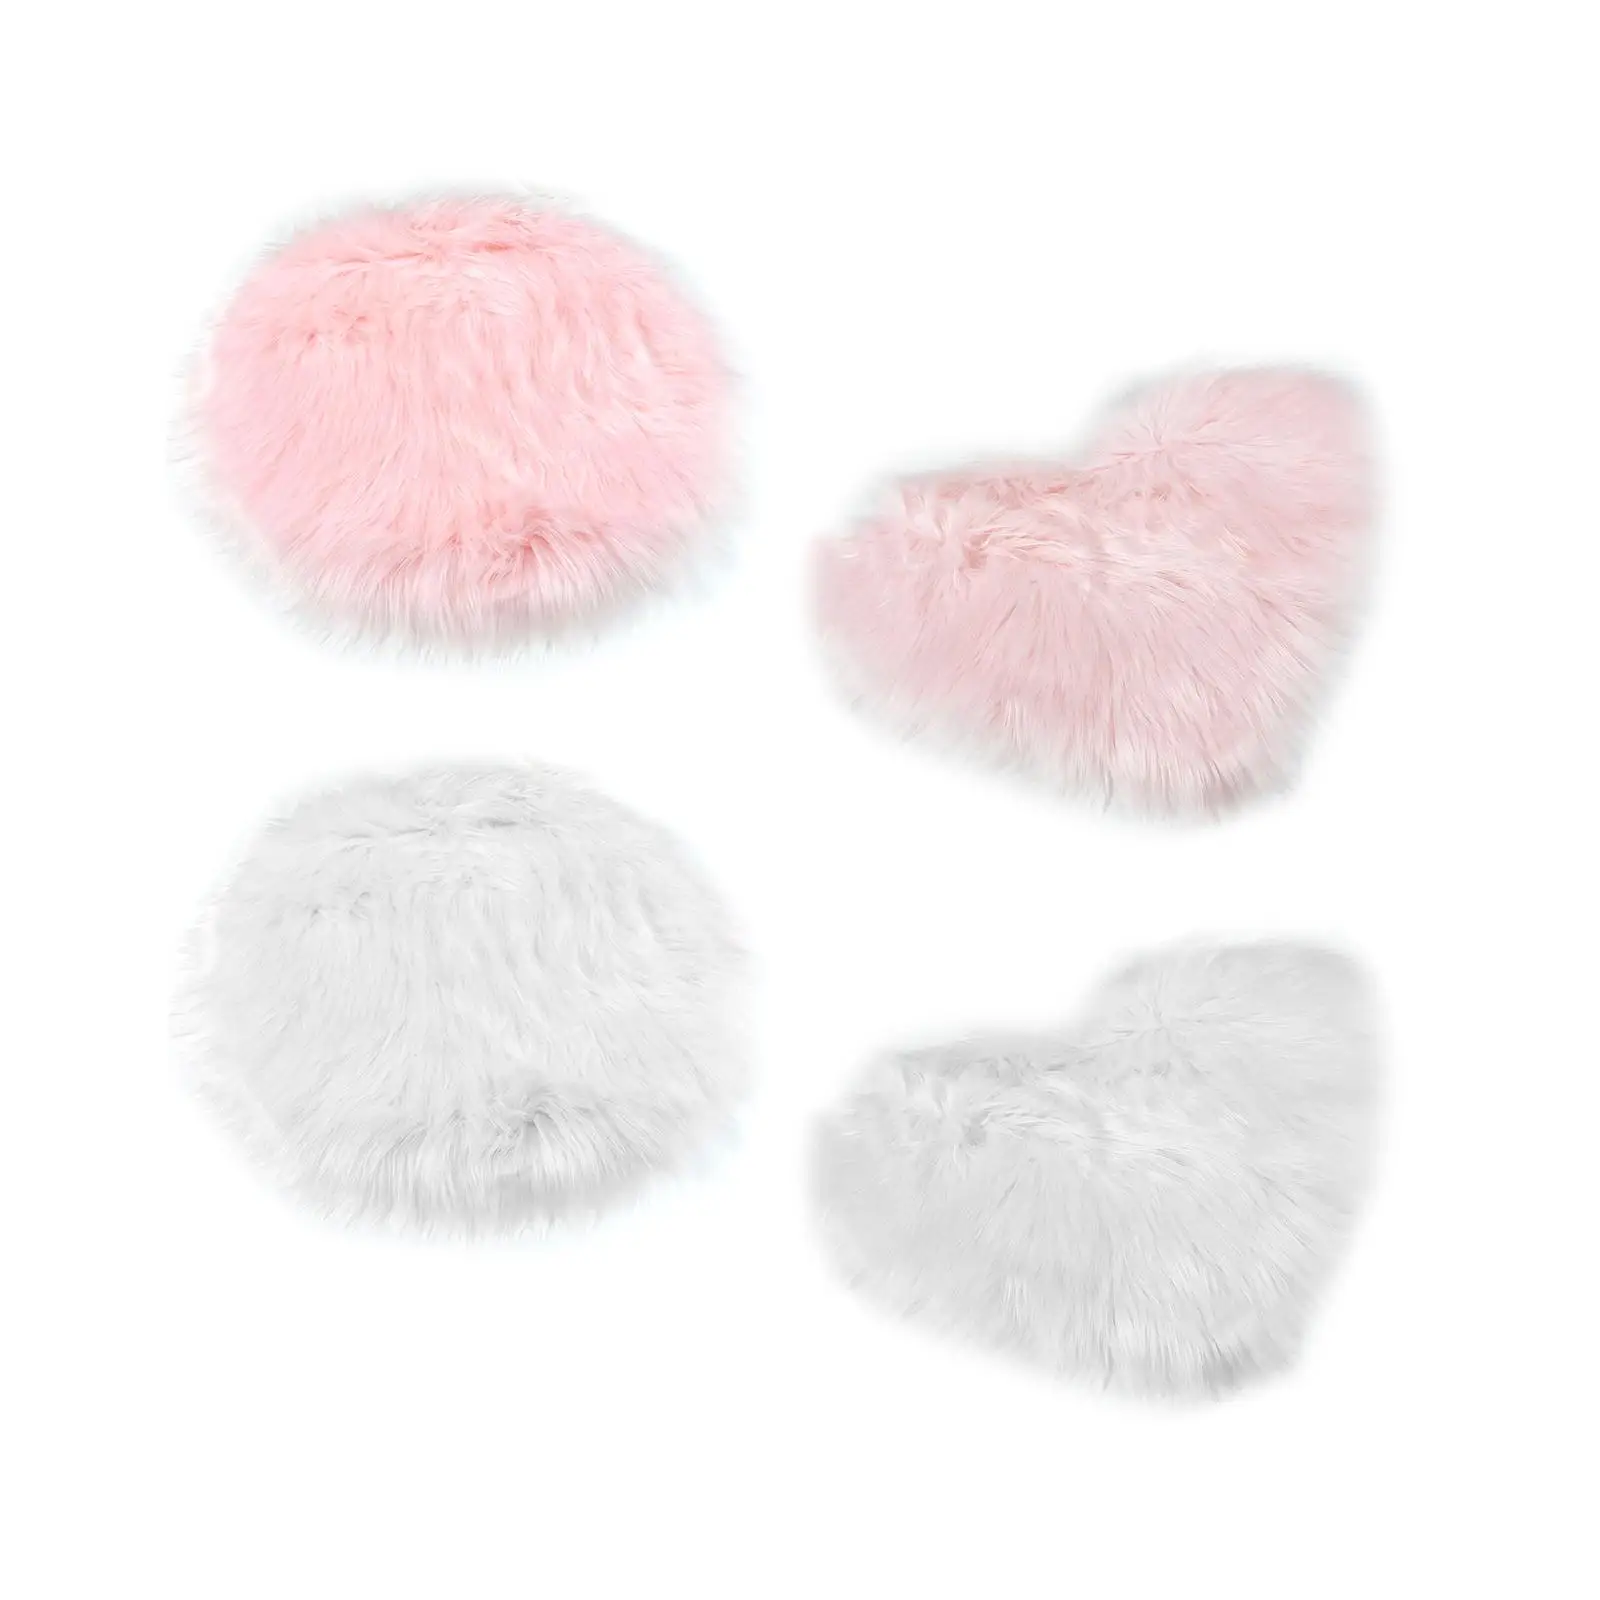 Soft Plush Area Rug Luxury Photo Props for Desktop Photography Nail Art